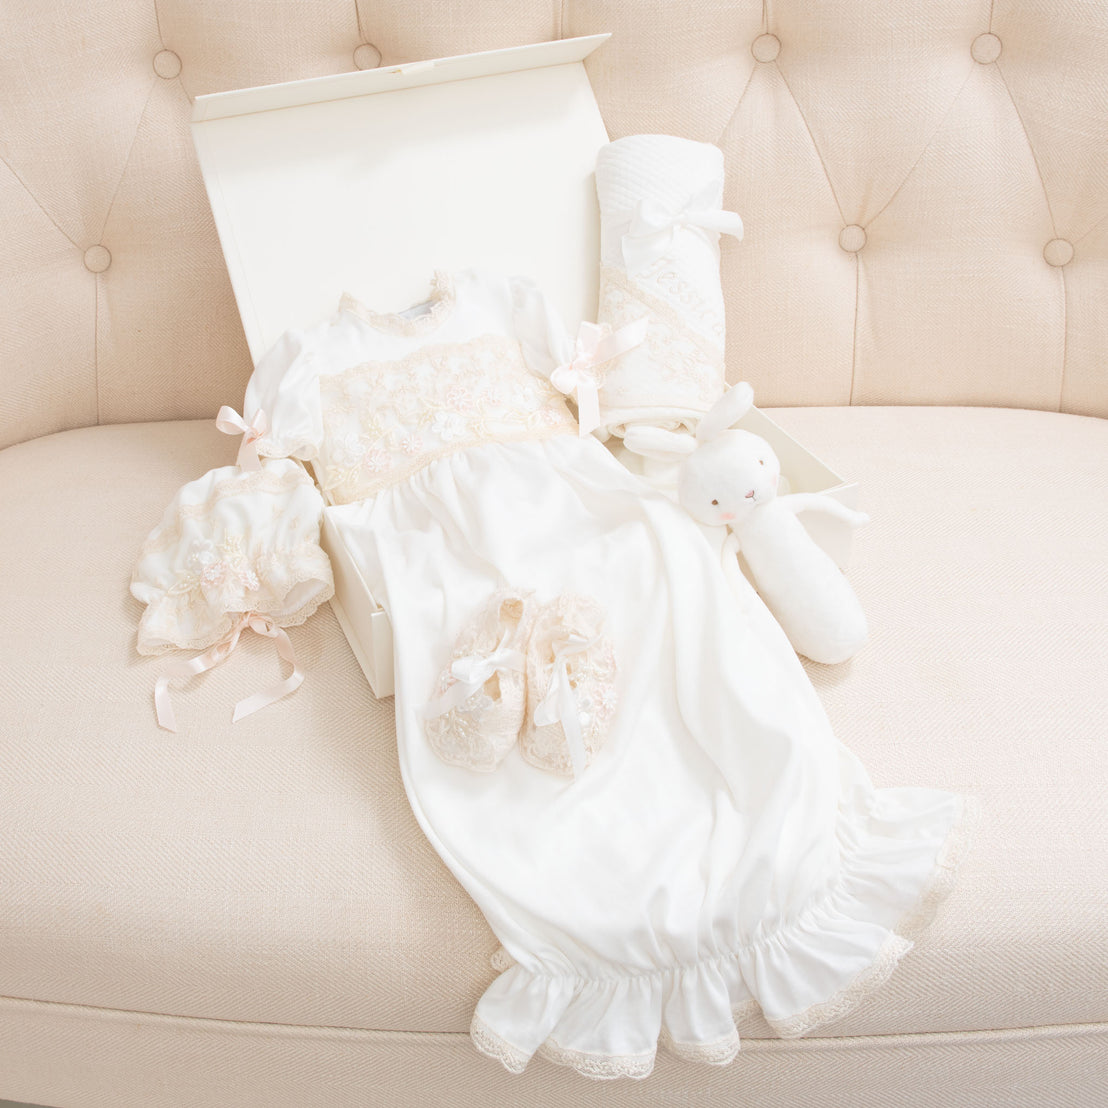 The items included in the Jessica Newborn Gift Set laid out of the white gift box on a beige sofa. The Jessica Newborn Gown is laid out along with the matching bonnet, booties, white bunny chime, and personalized blanket.